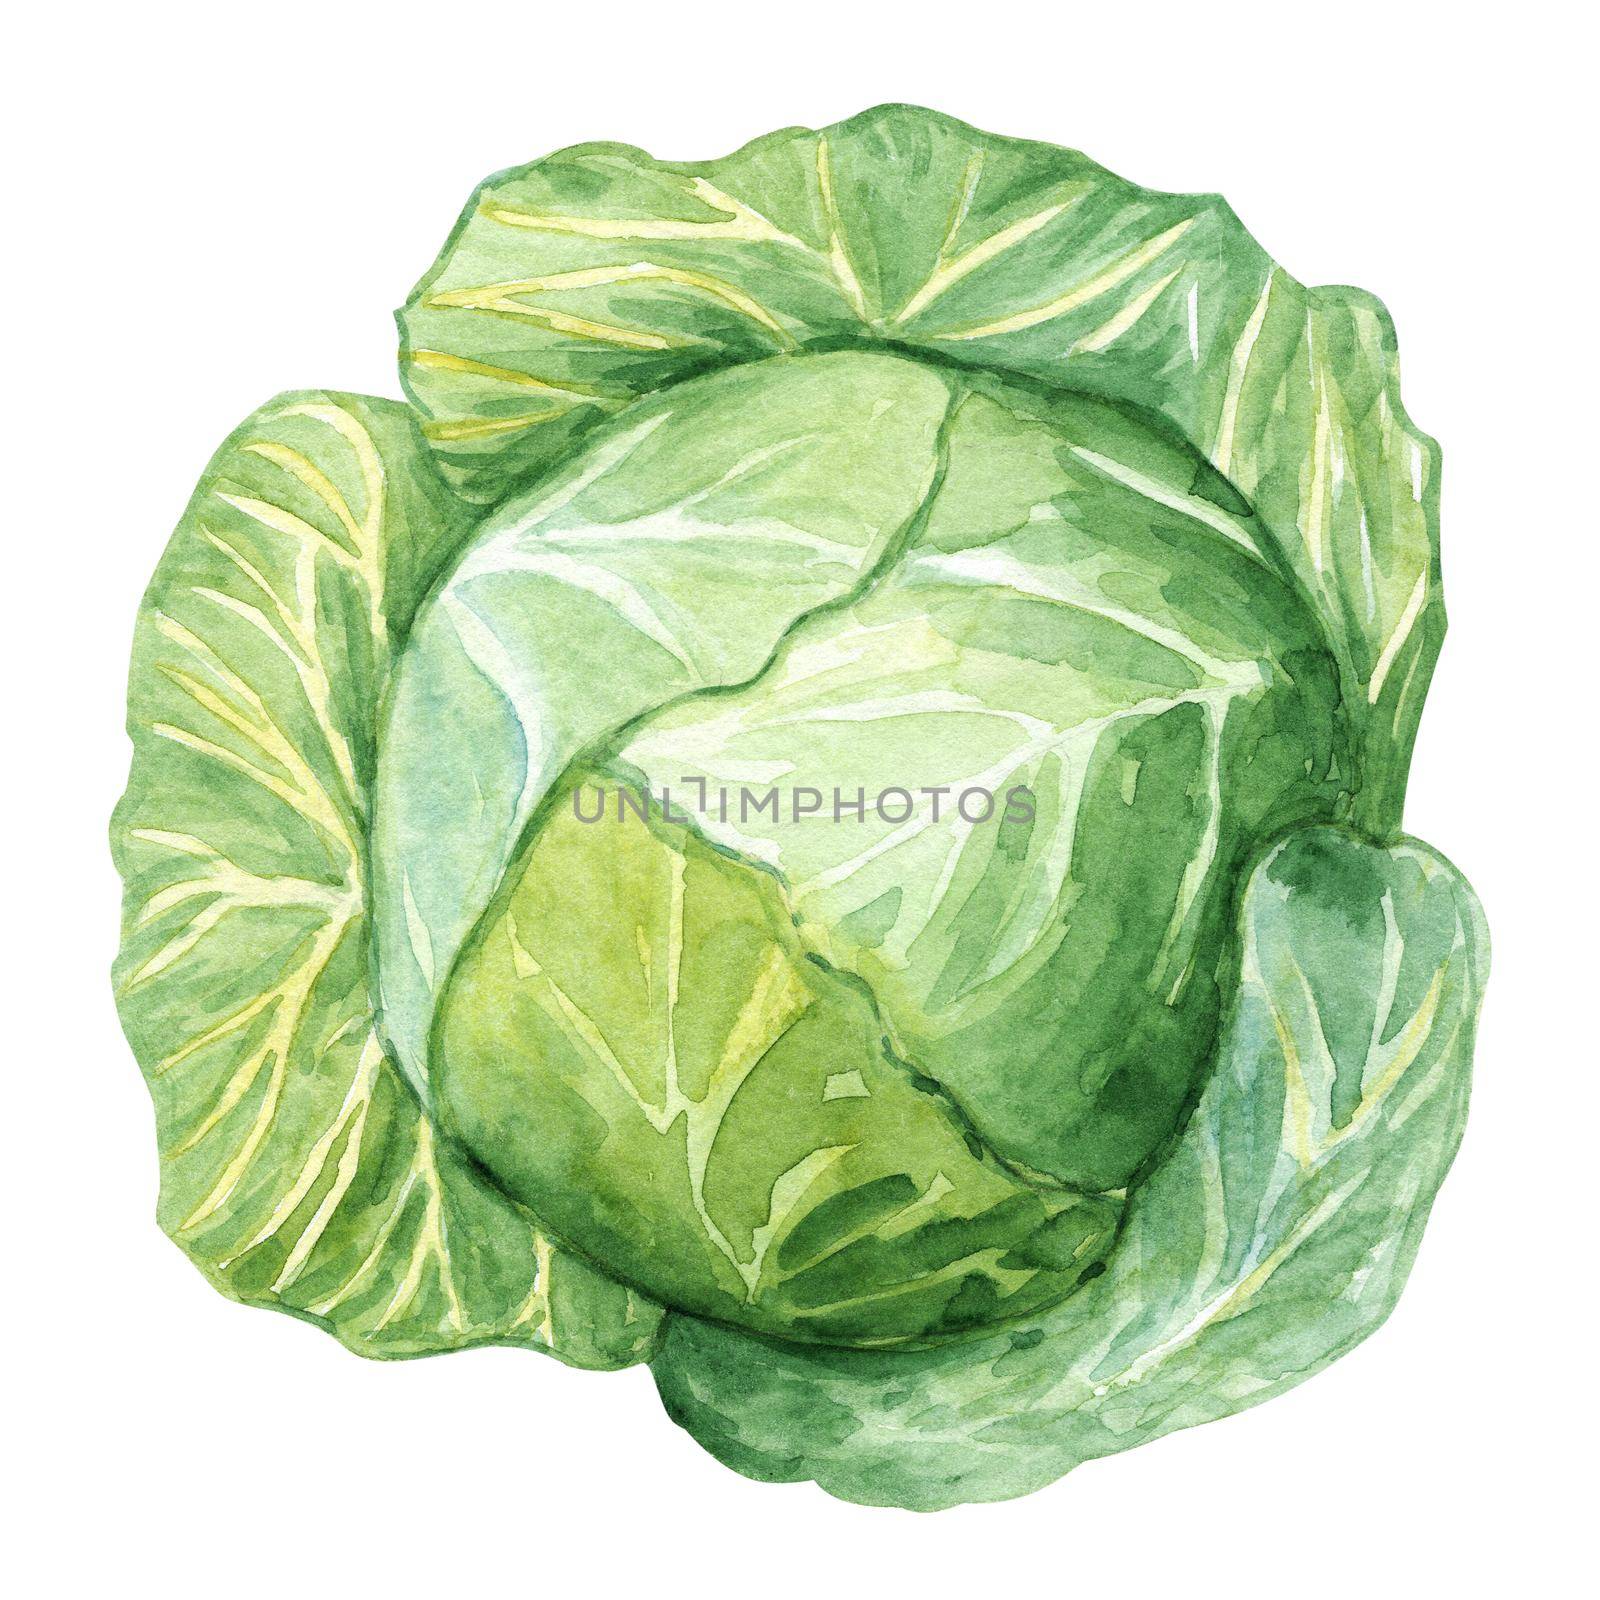 Watercolor green cabbage isolated on white background by dreamloud